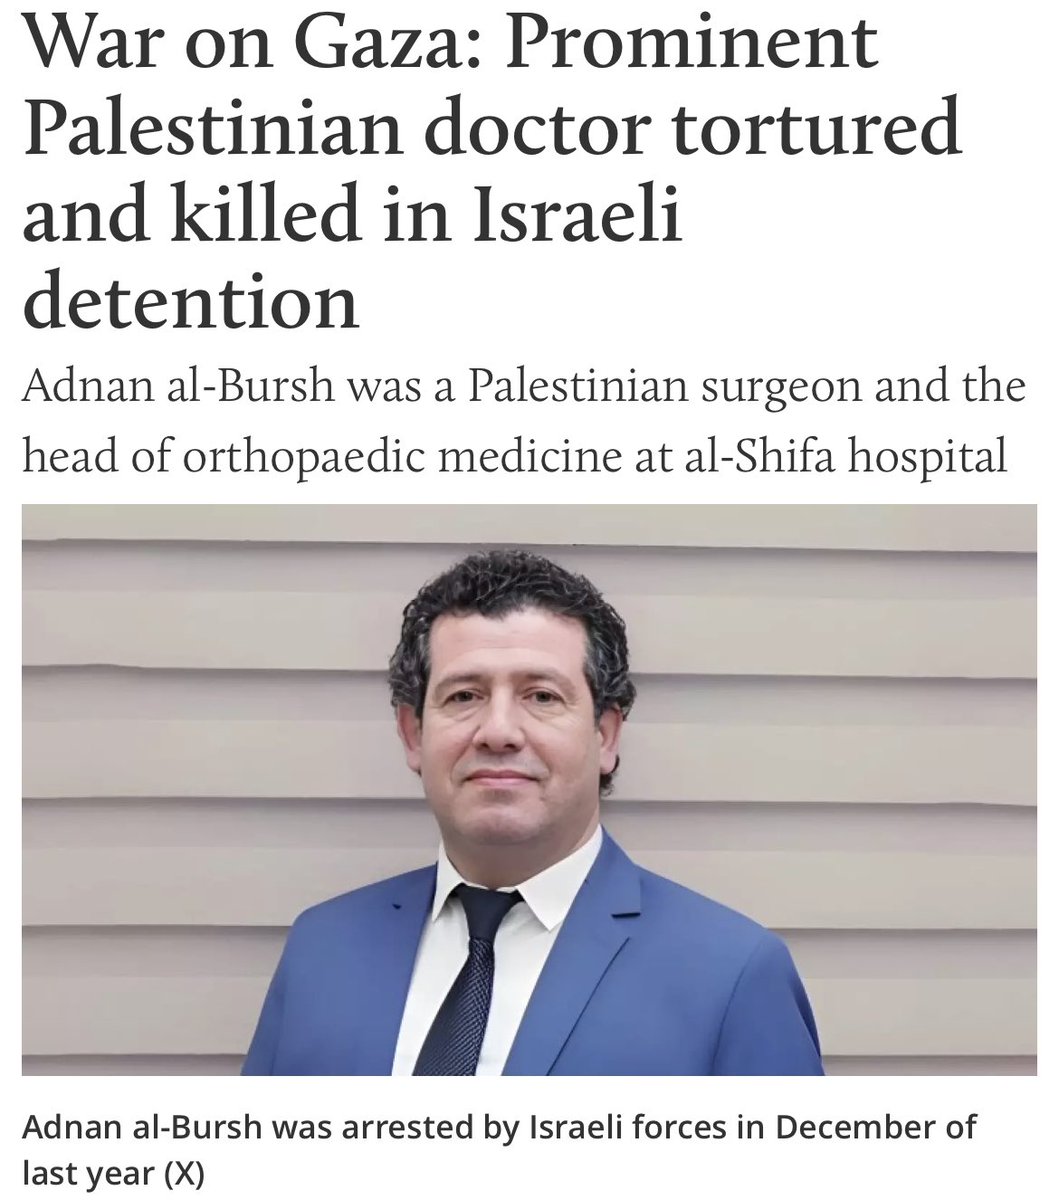 Despite thousands of reports of torture, sexual assault, and physical abuse in Israeli prisons, the Zionists will continue to pretend it’s not happening Prisoners are saying this beloved doctor was severely tortured for weeks/months It’s simple, if he wasn’t tortured, let his